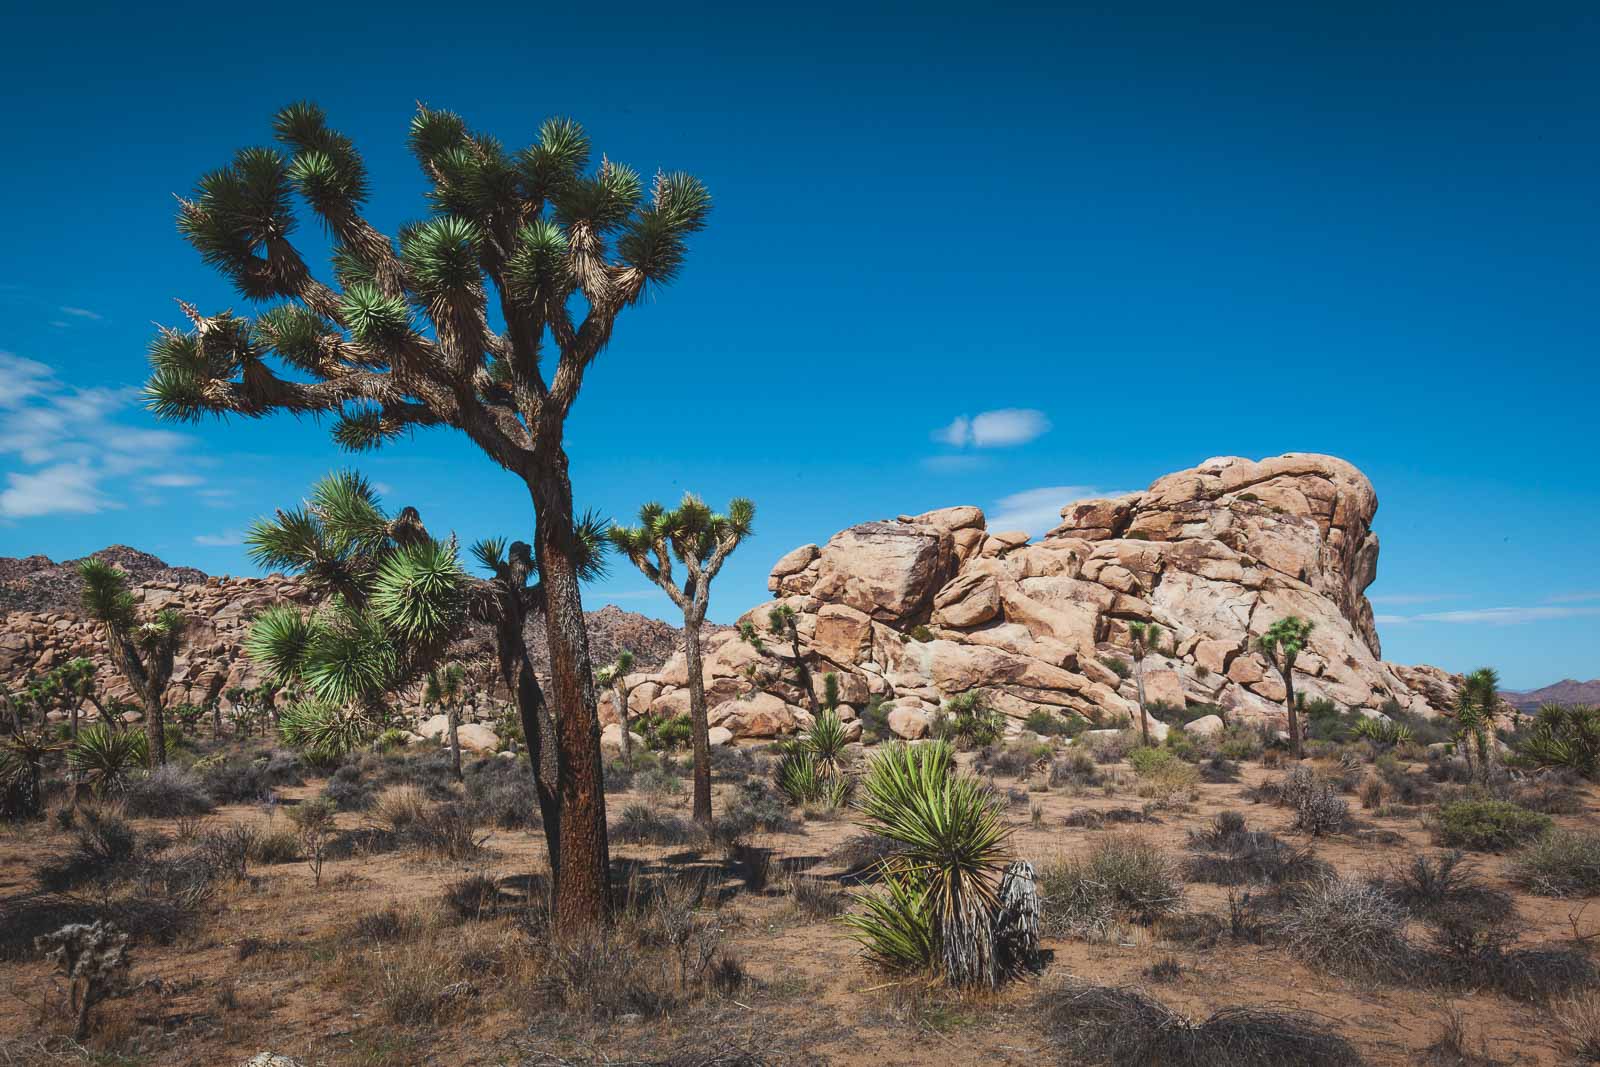 Hikes in Joshua Tree Boy Scout Trail